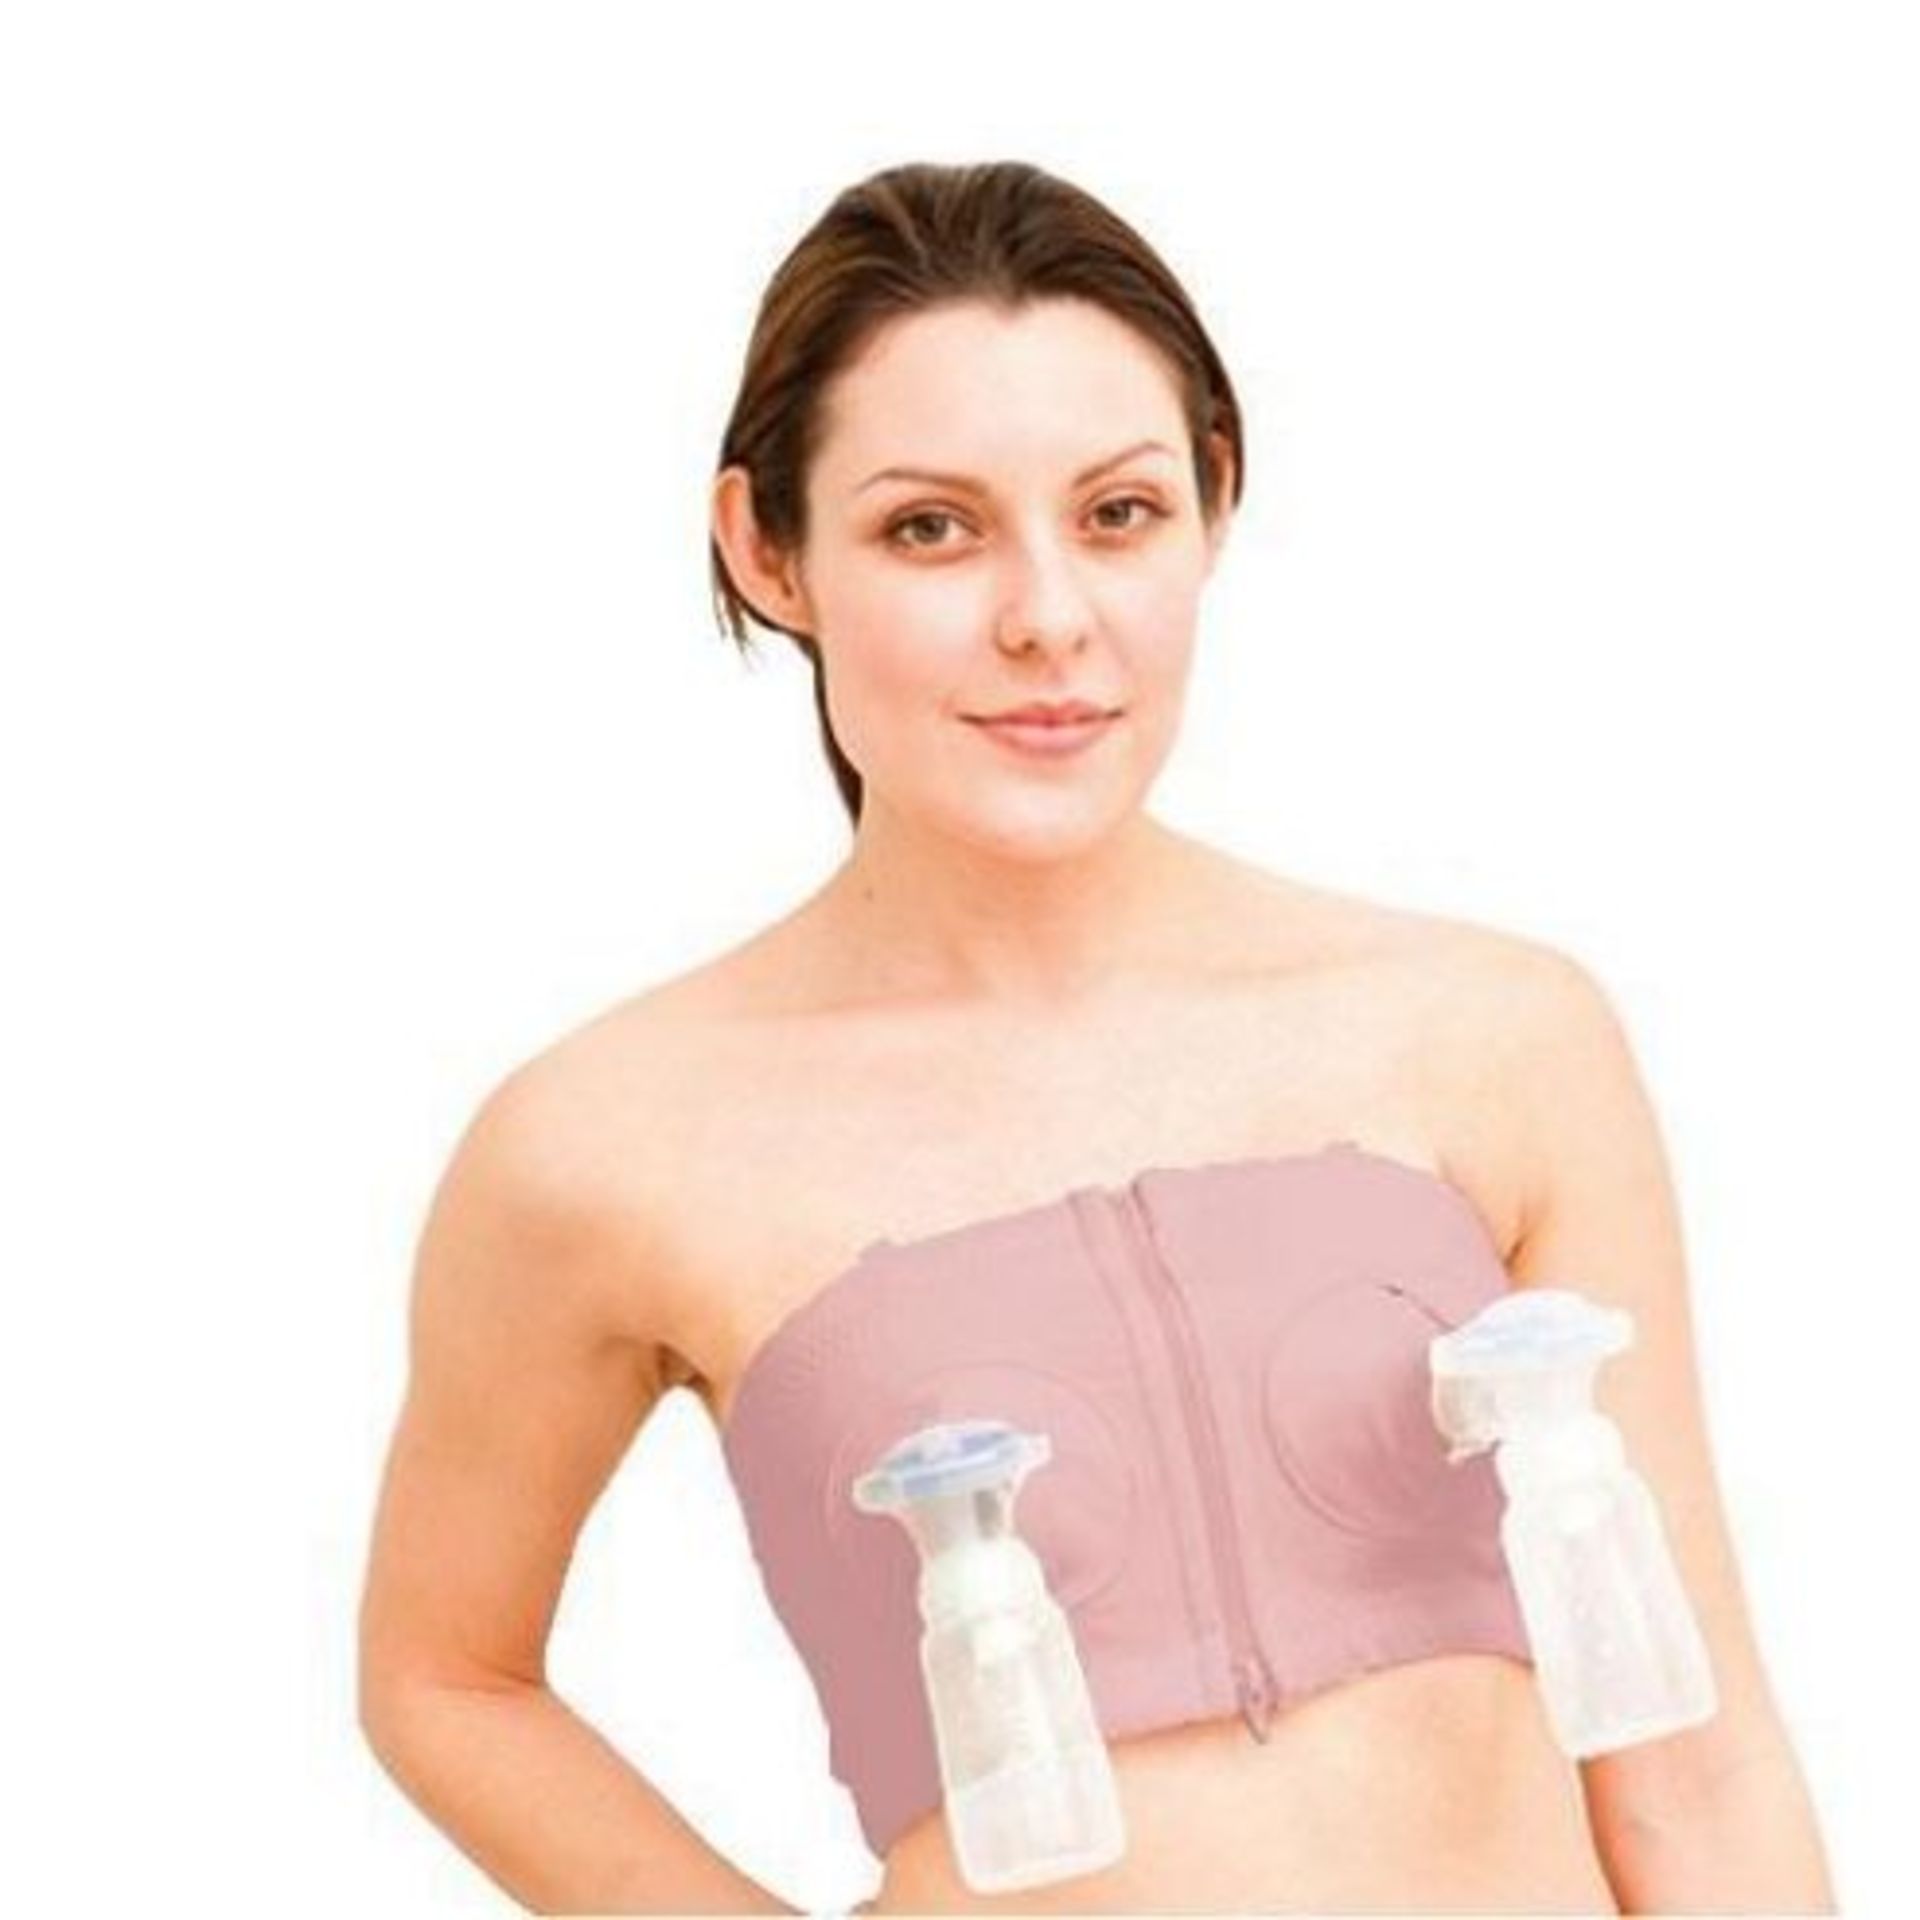 KOKY086 Simple Wishes Hands Free Breast Pump Bra L